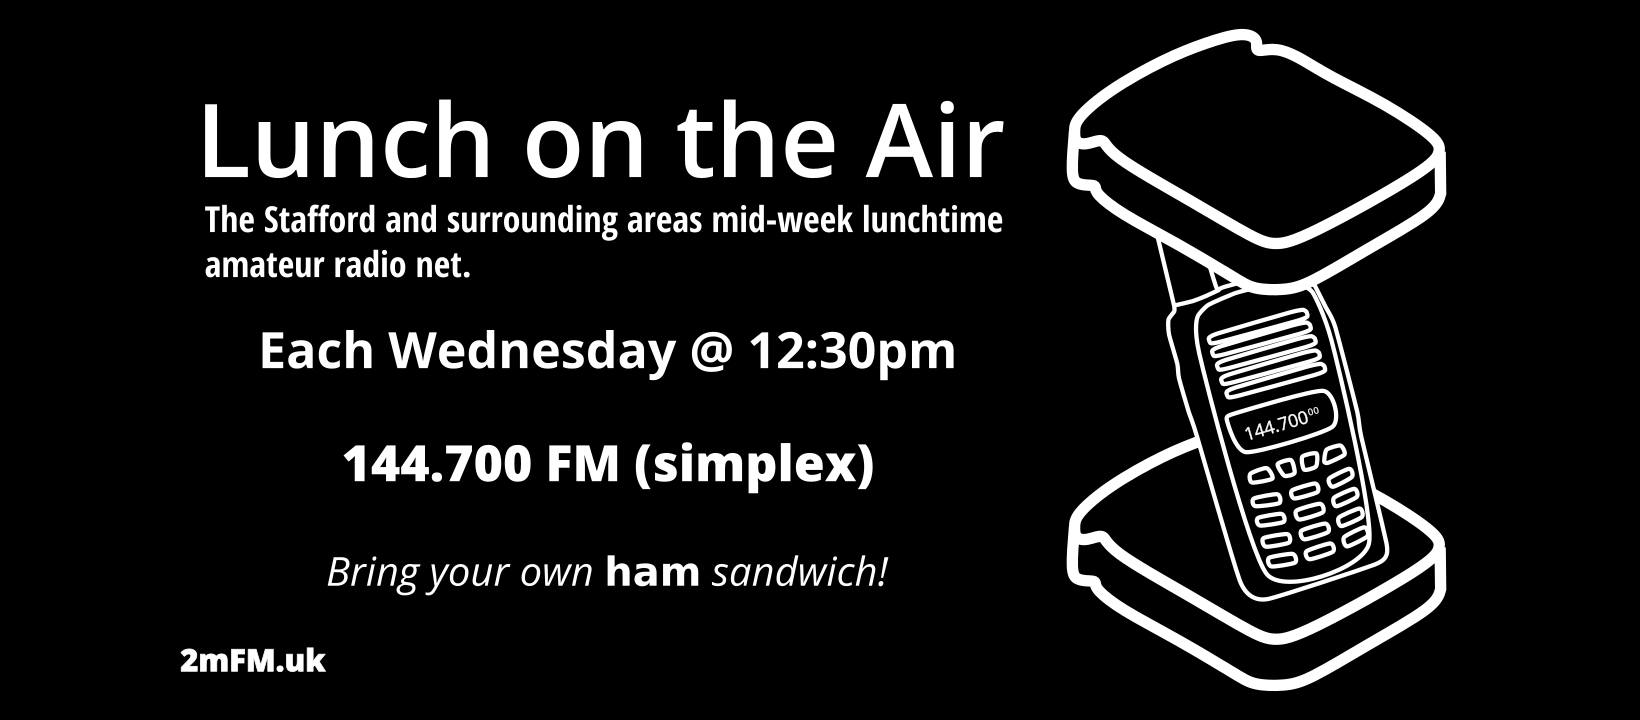 Lunch on the air graphic